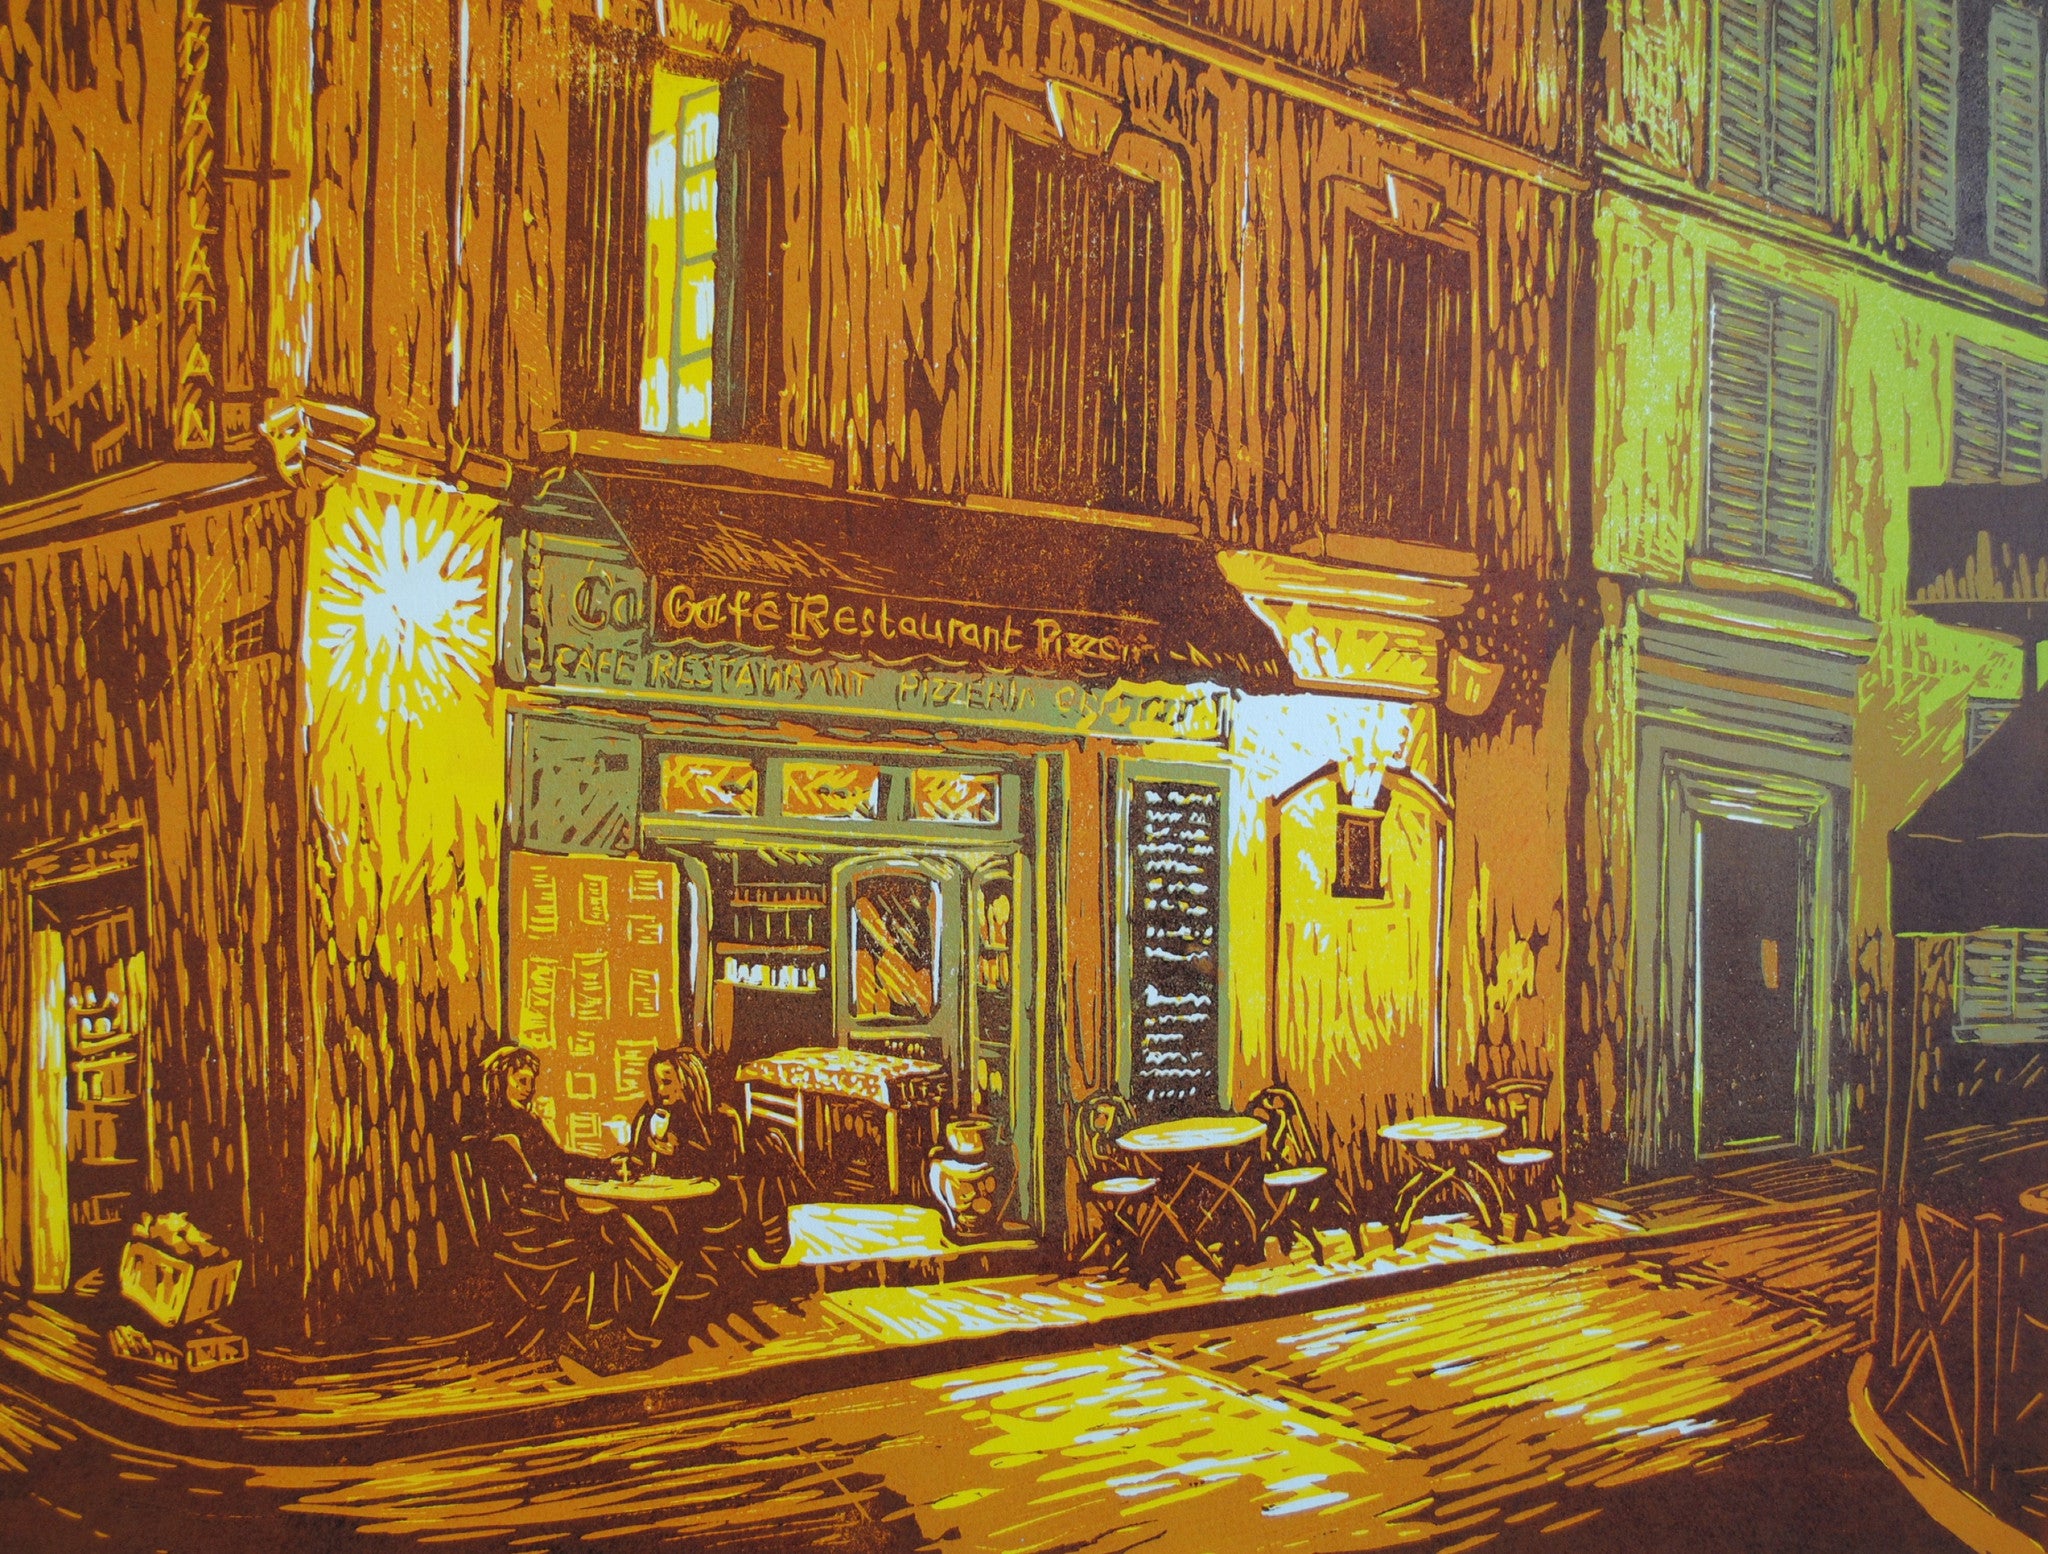 "Late Night at the Corner Cafe"